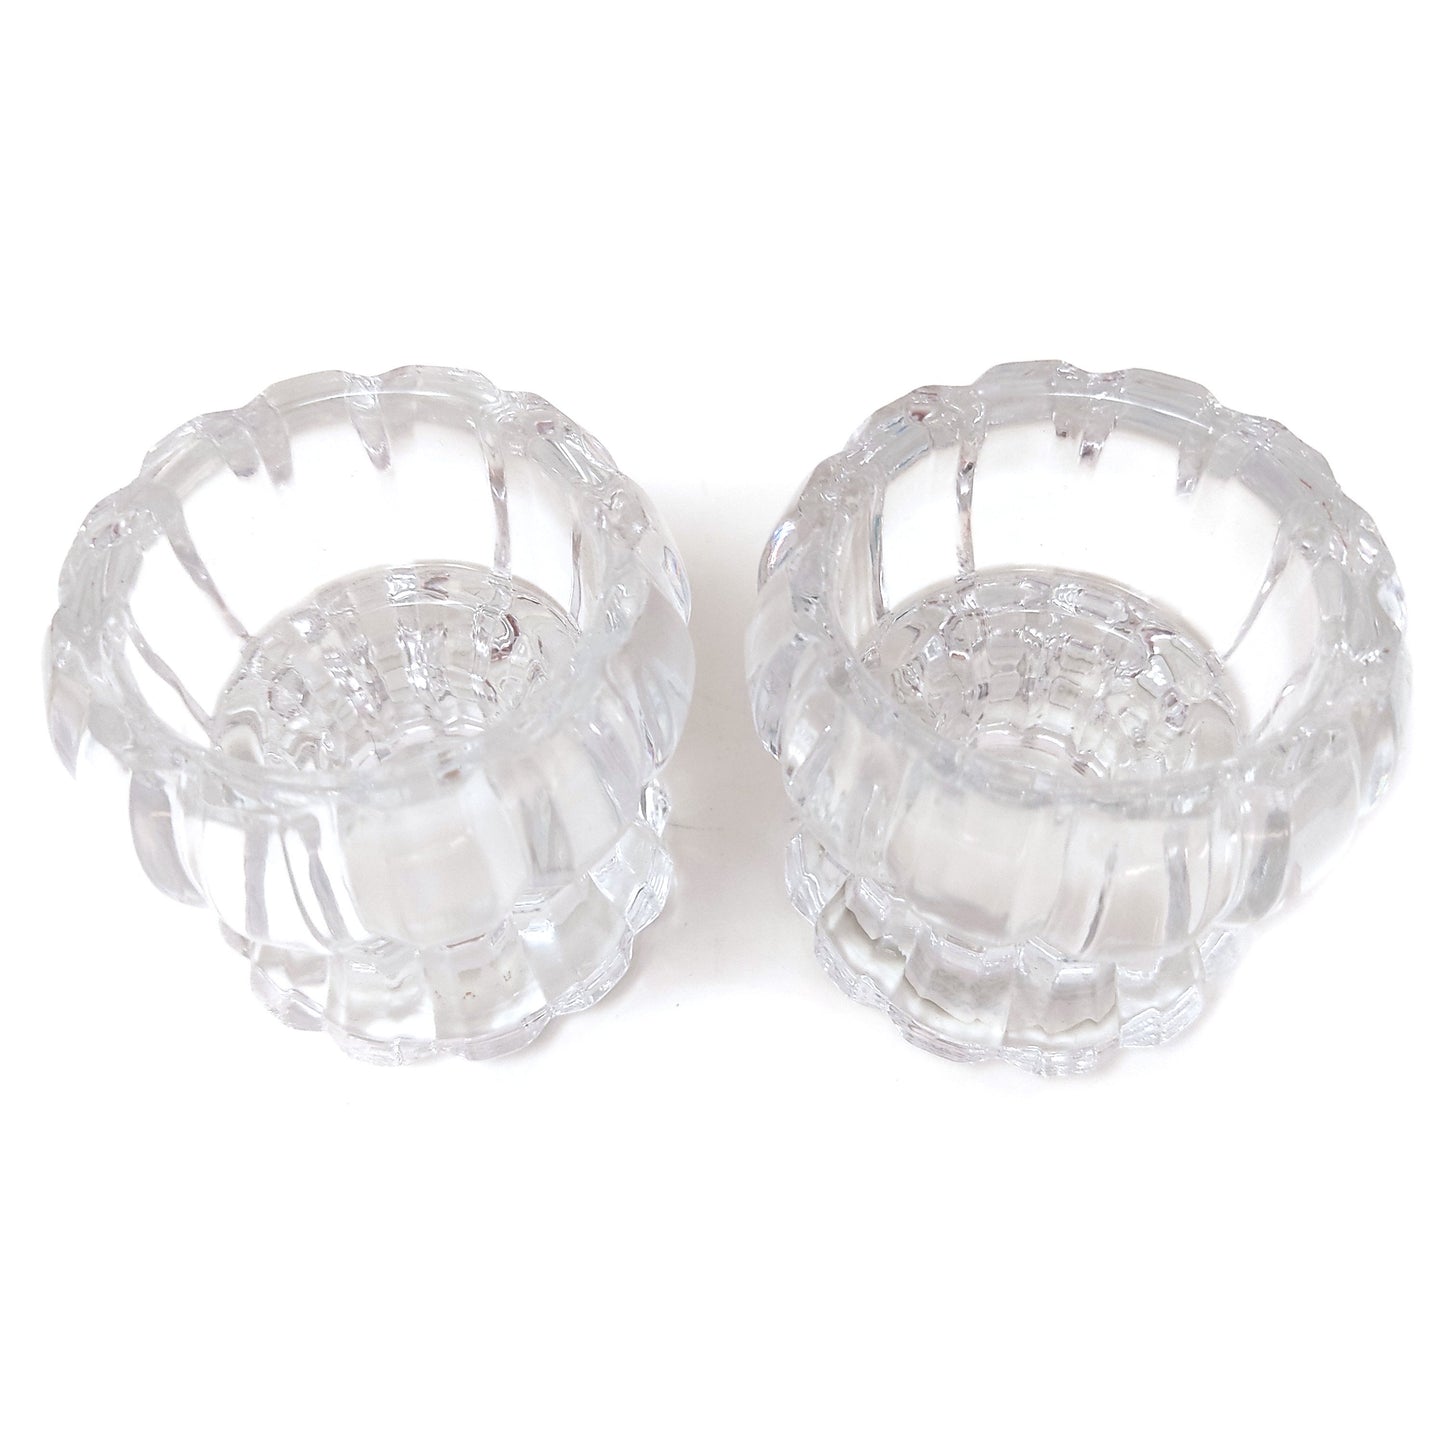 Deplomb Lead Crystal Candle Holders Tea Light Candle Holder Home Decor - Pair 2.5"